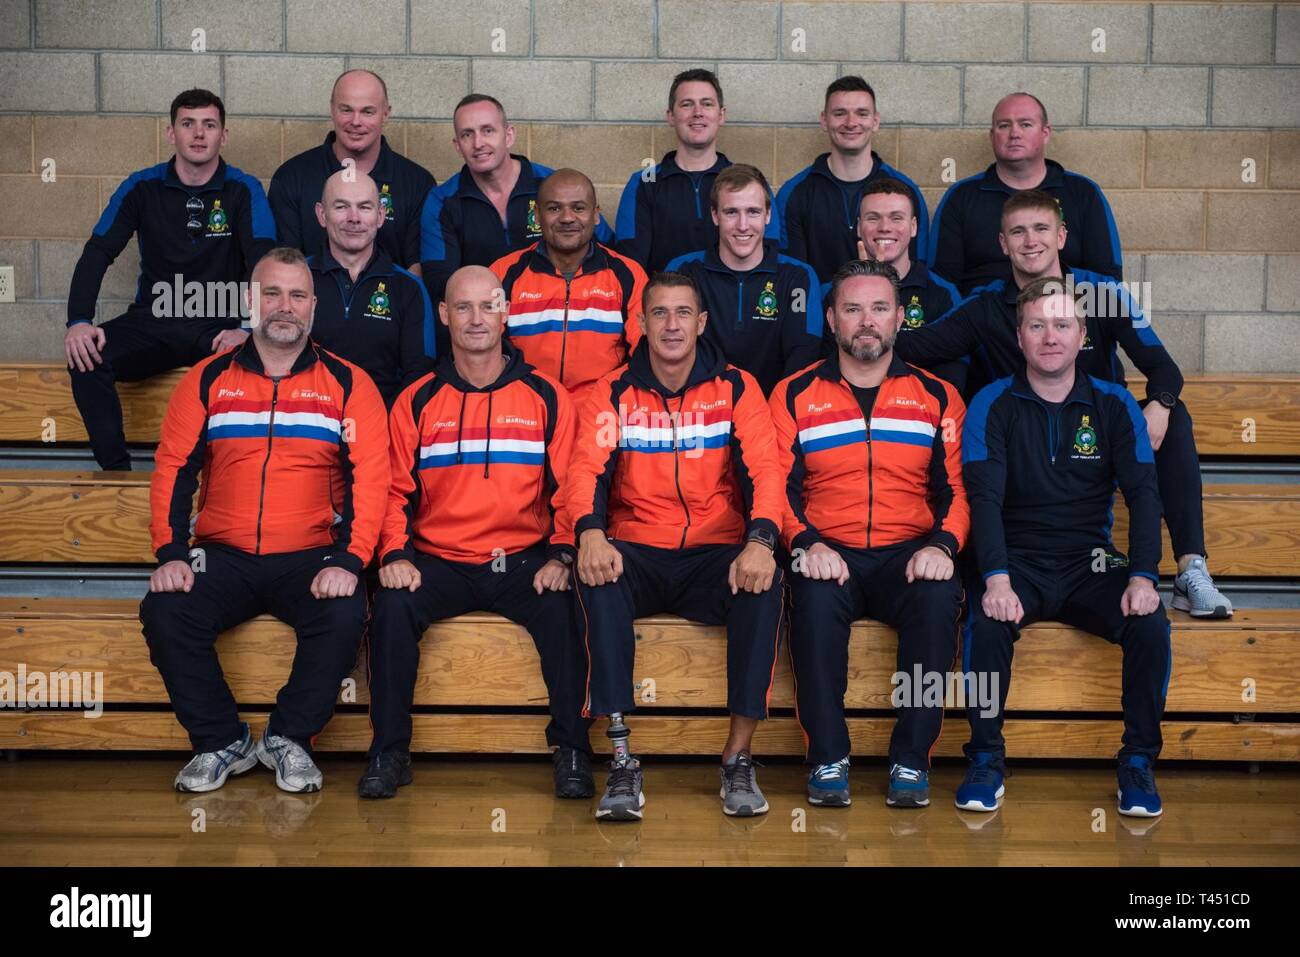 MARINE CORPS BASE CAMP PENDLETON, CALIFORNIA –Teams United Kingdom, Netherlands and France pose for a photo after the 2019 Marine Corps Trials opening ceremony at Marine Corps Base Camp Pendleton, California, Feb. 26, 2019. The Marine Corps Trials promotes recovery and rehabilitation through adaptive sport participation and develops camaraderie among recovering service members (RSMs) and veterans. It is an opportunity for RSMs to demonstrate their achievements and serves as the primary venue to select Marine Corps participants for the DoD Warrior Games. Stock Photo